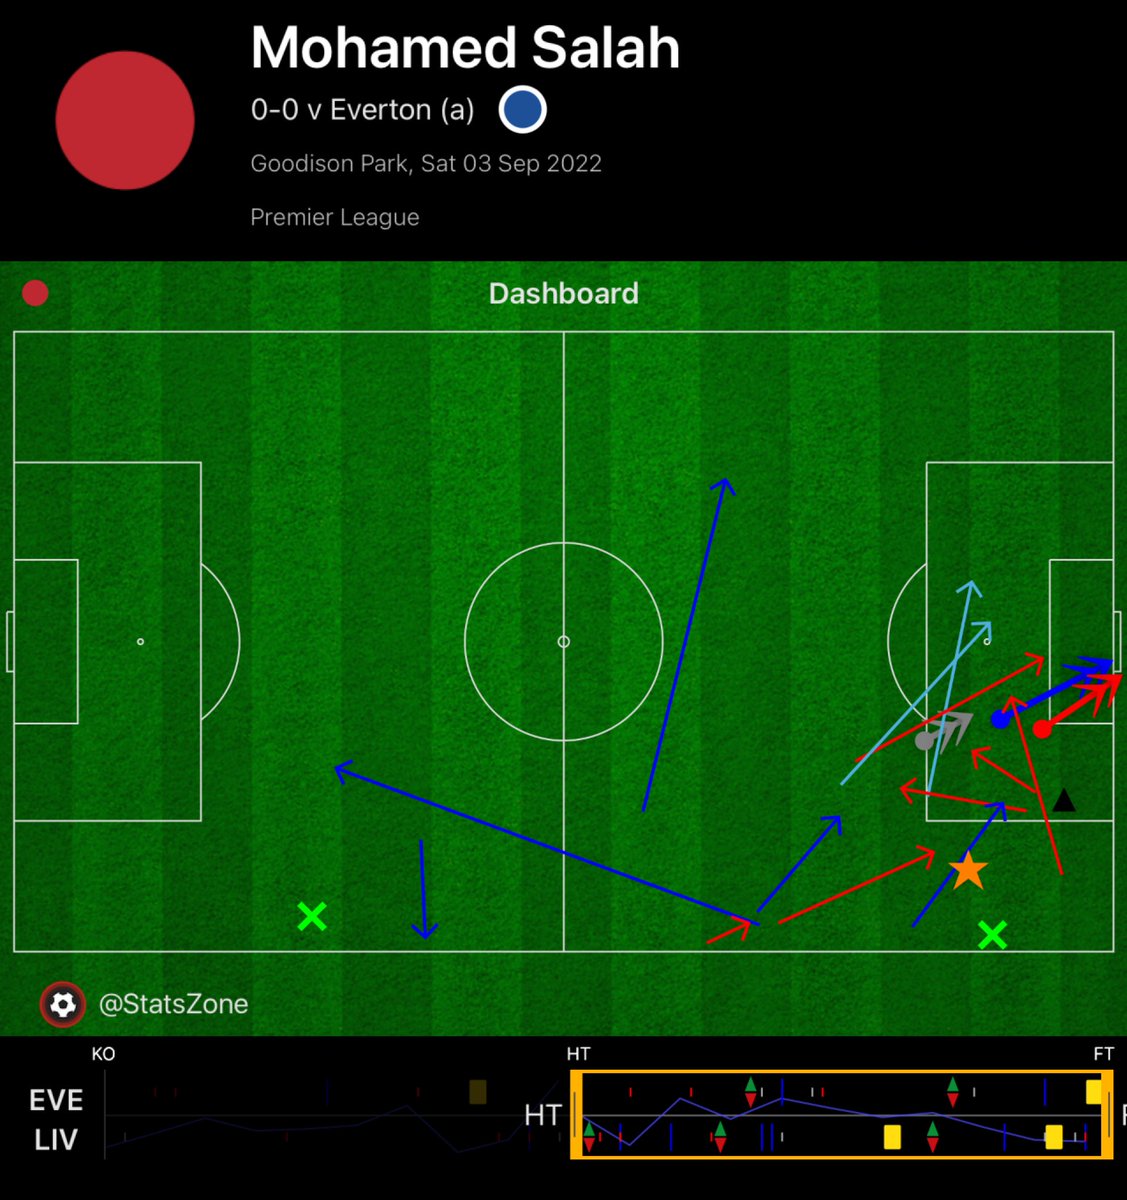 Here’s Mo Salah’s first and second half dashboards vs Everton via @StatsZone. No idea why Jürgen Klopp and Liverpool have him so wide. All 3 shots and 2/3 chances created in 2nd half, he and entire #LFC team much better 2nd half. Not great… um, strategy?